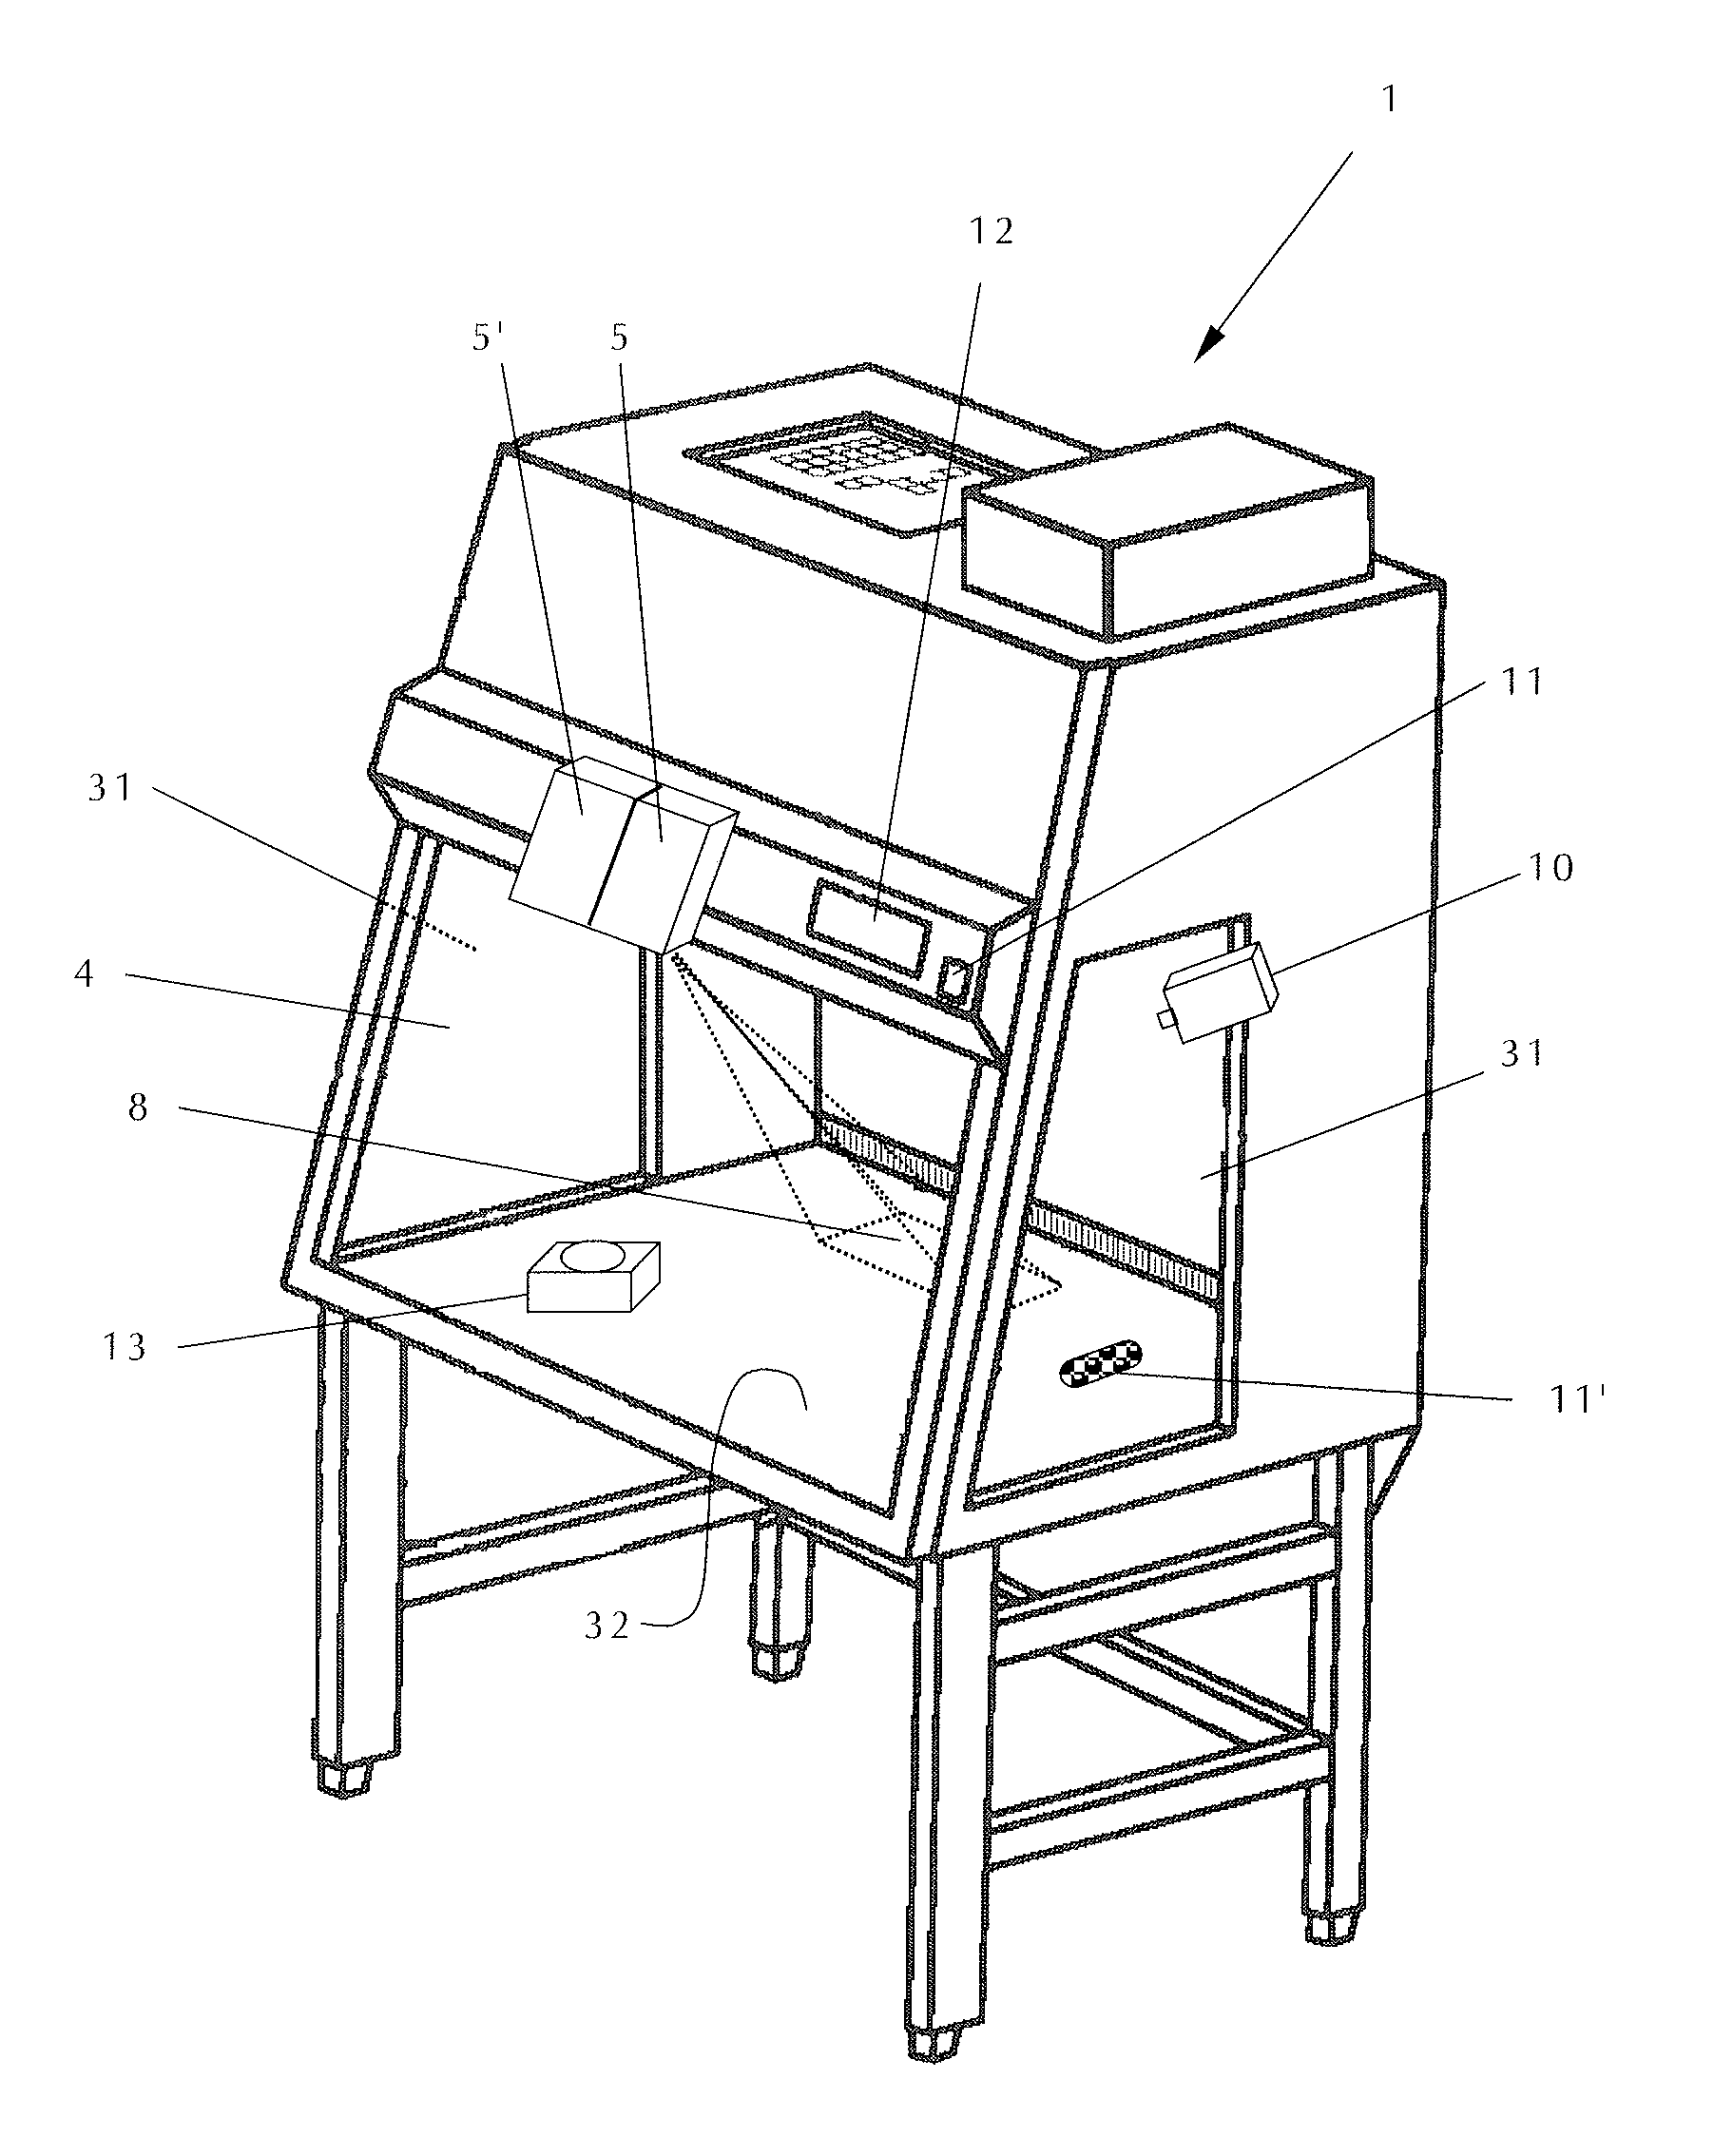 Laboratory Fume Hood With A Projection Apparatus